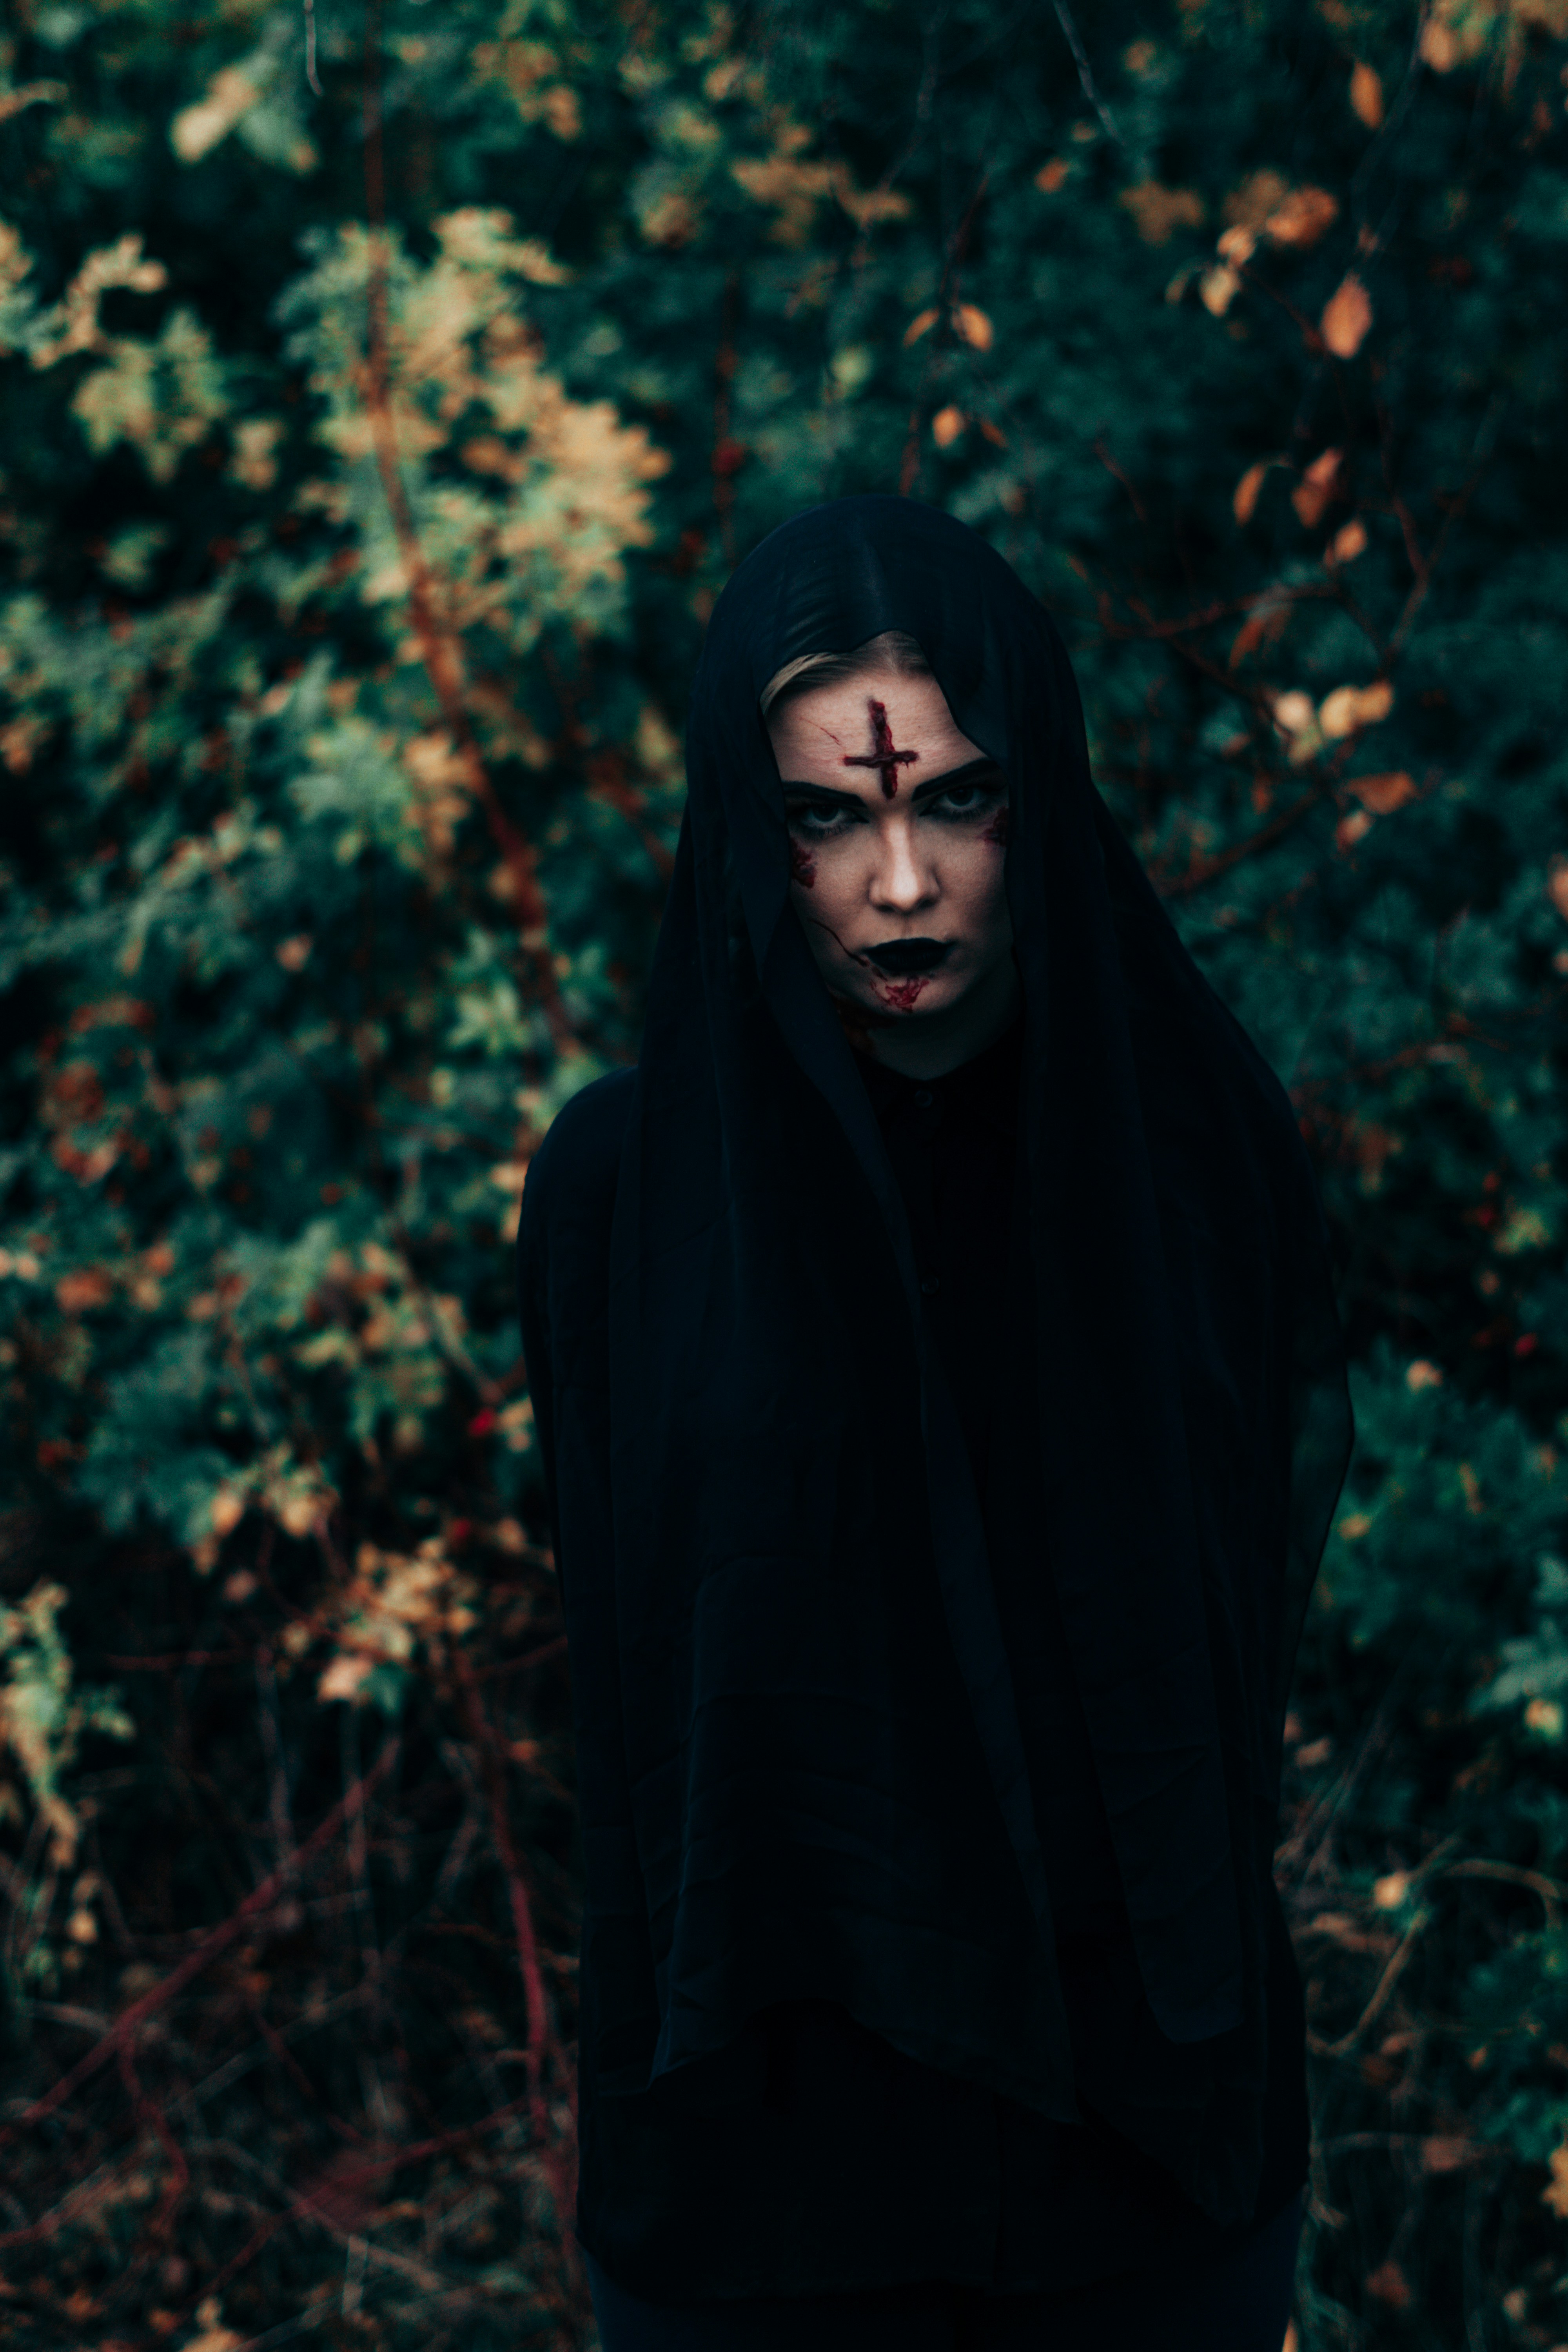 Don't get spooked into using low-quality images. At Unsplash, you can choose from a wide range of gorgeous halloween images that might just give you the chiils. Our photos are 100% free to use.